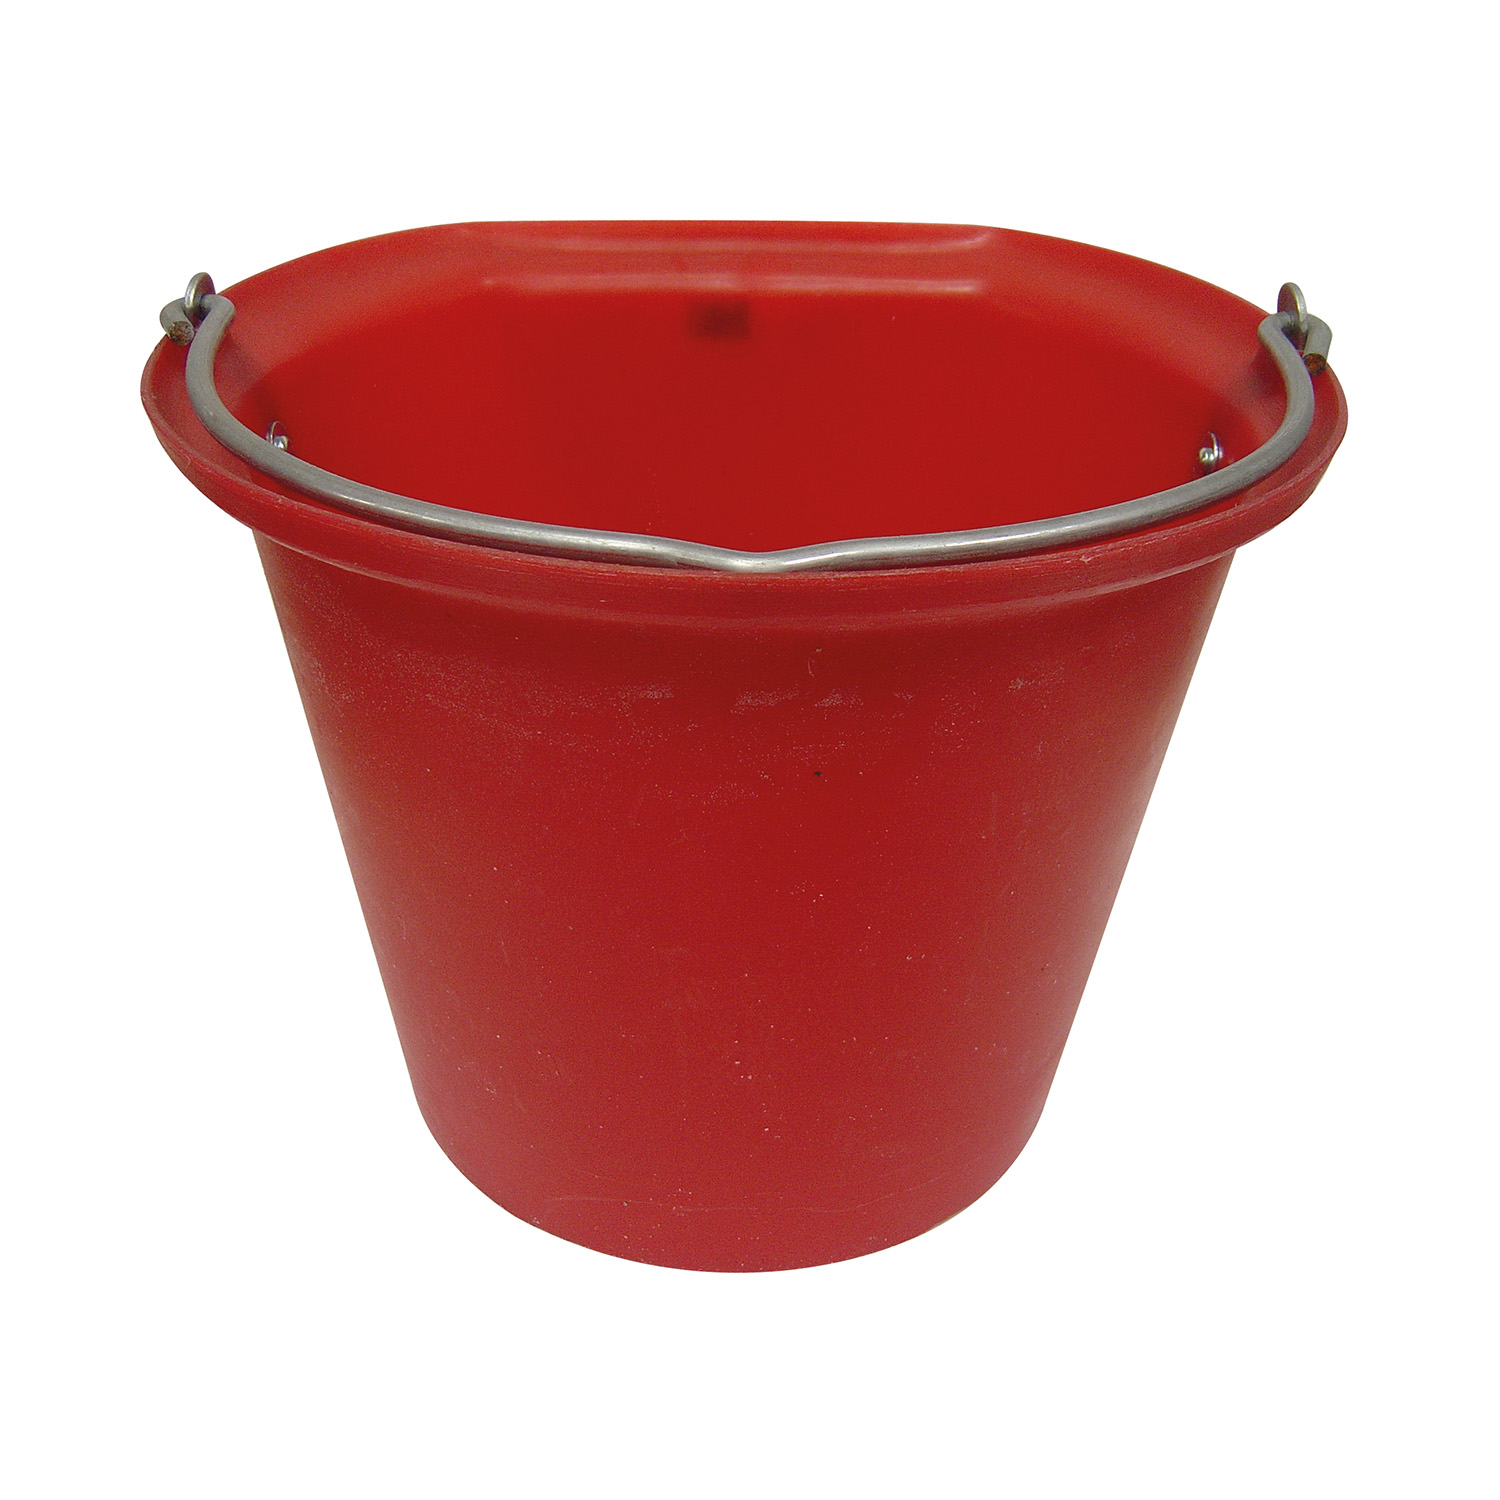 STUBBS HANGING BUCKET FLAT SIDED LARGE 18 LT S85A RED 18 LT